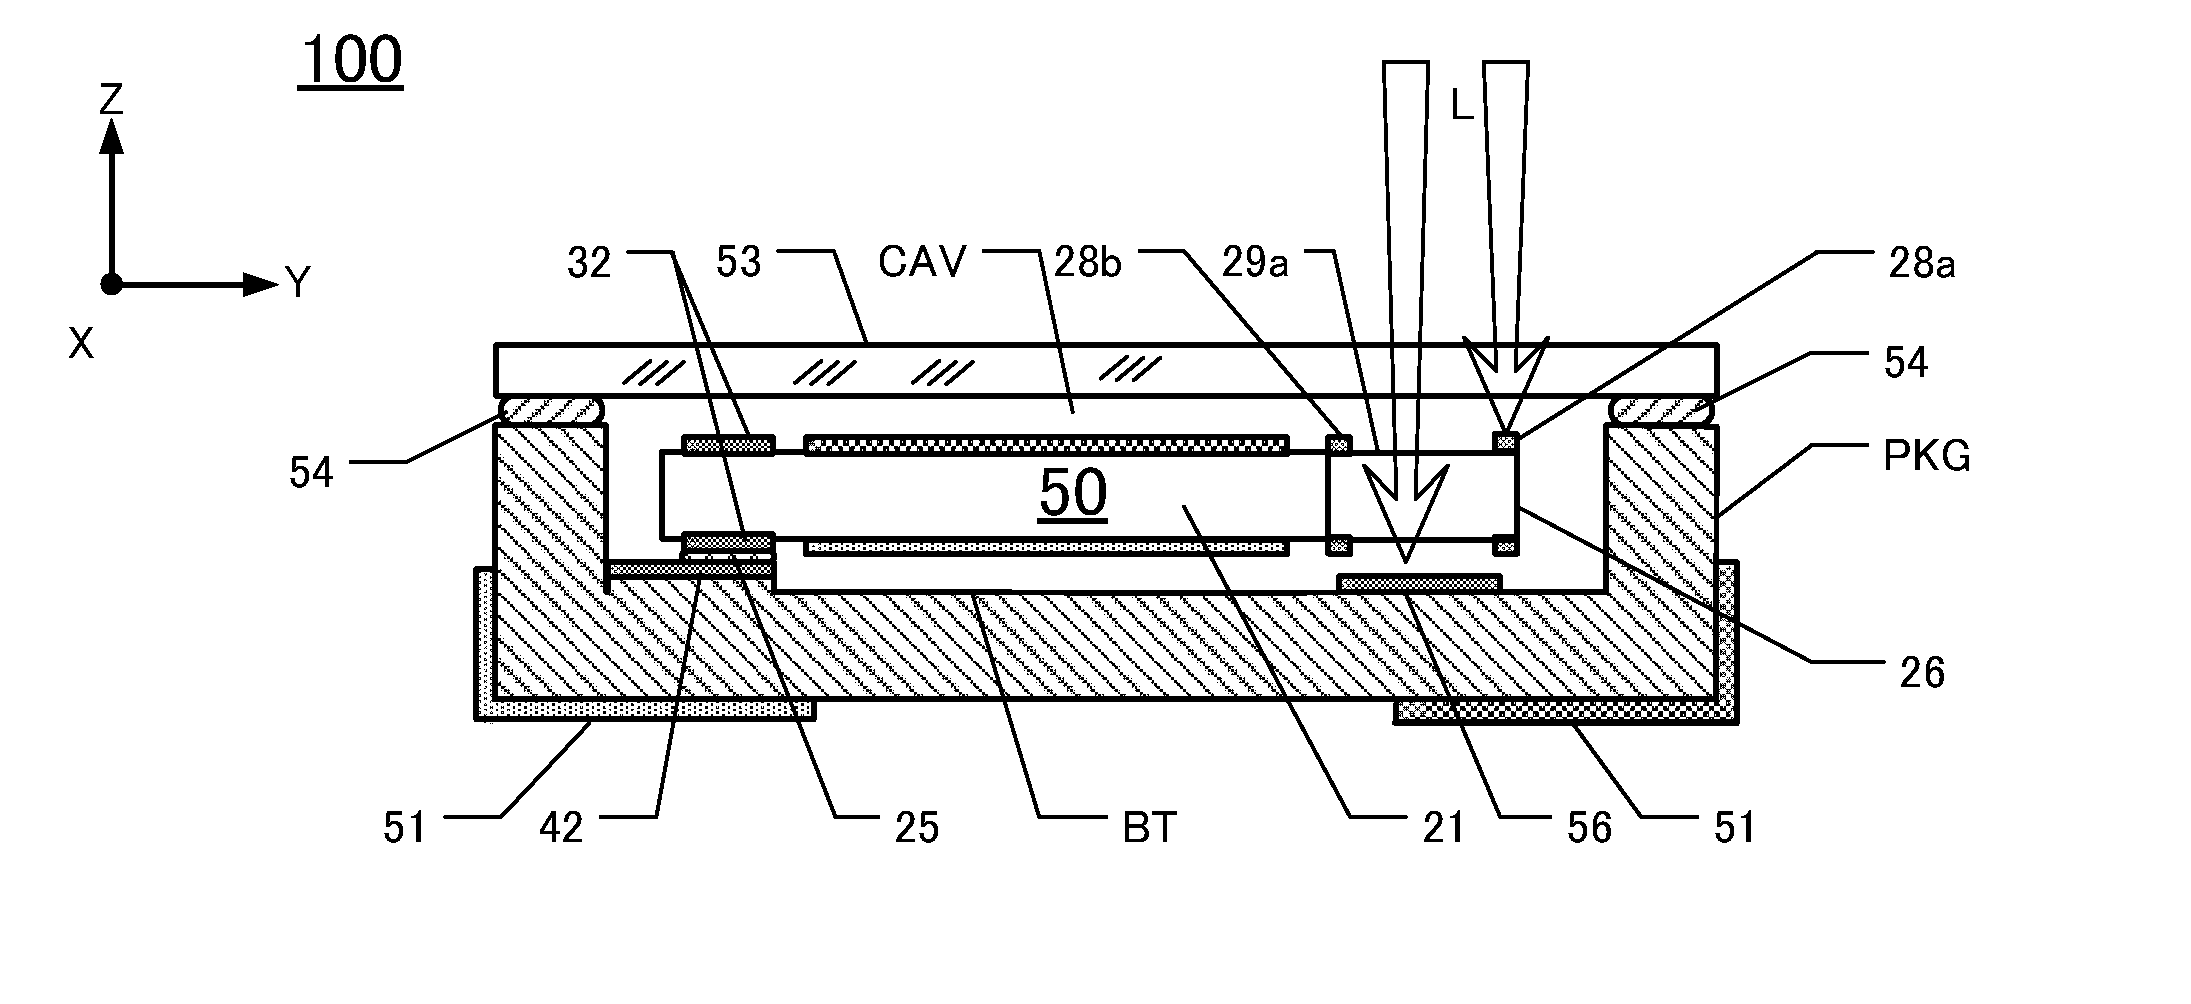 Piezoelectric devices including frequency-adjustment units